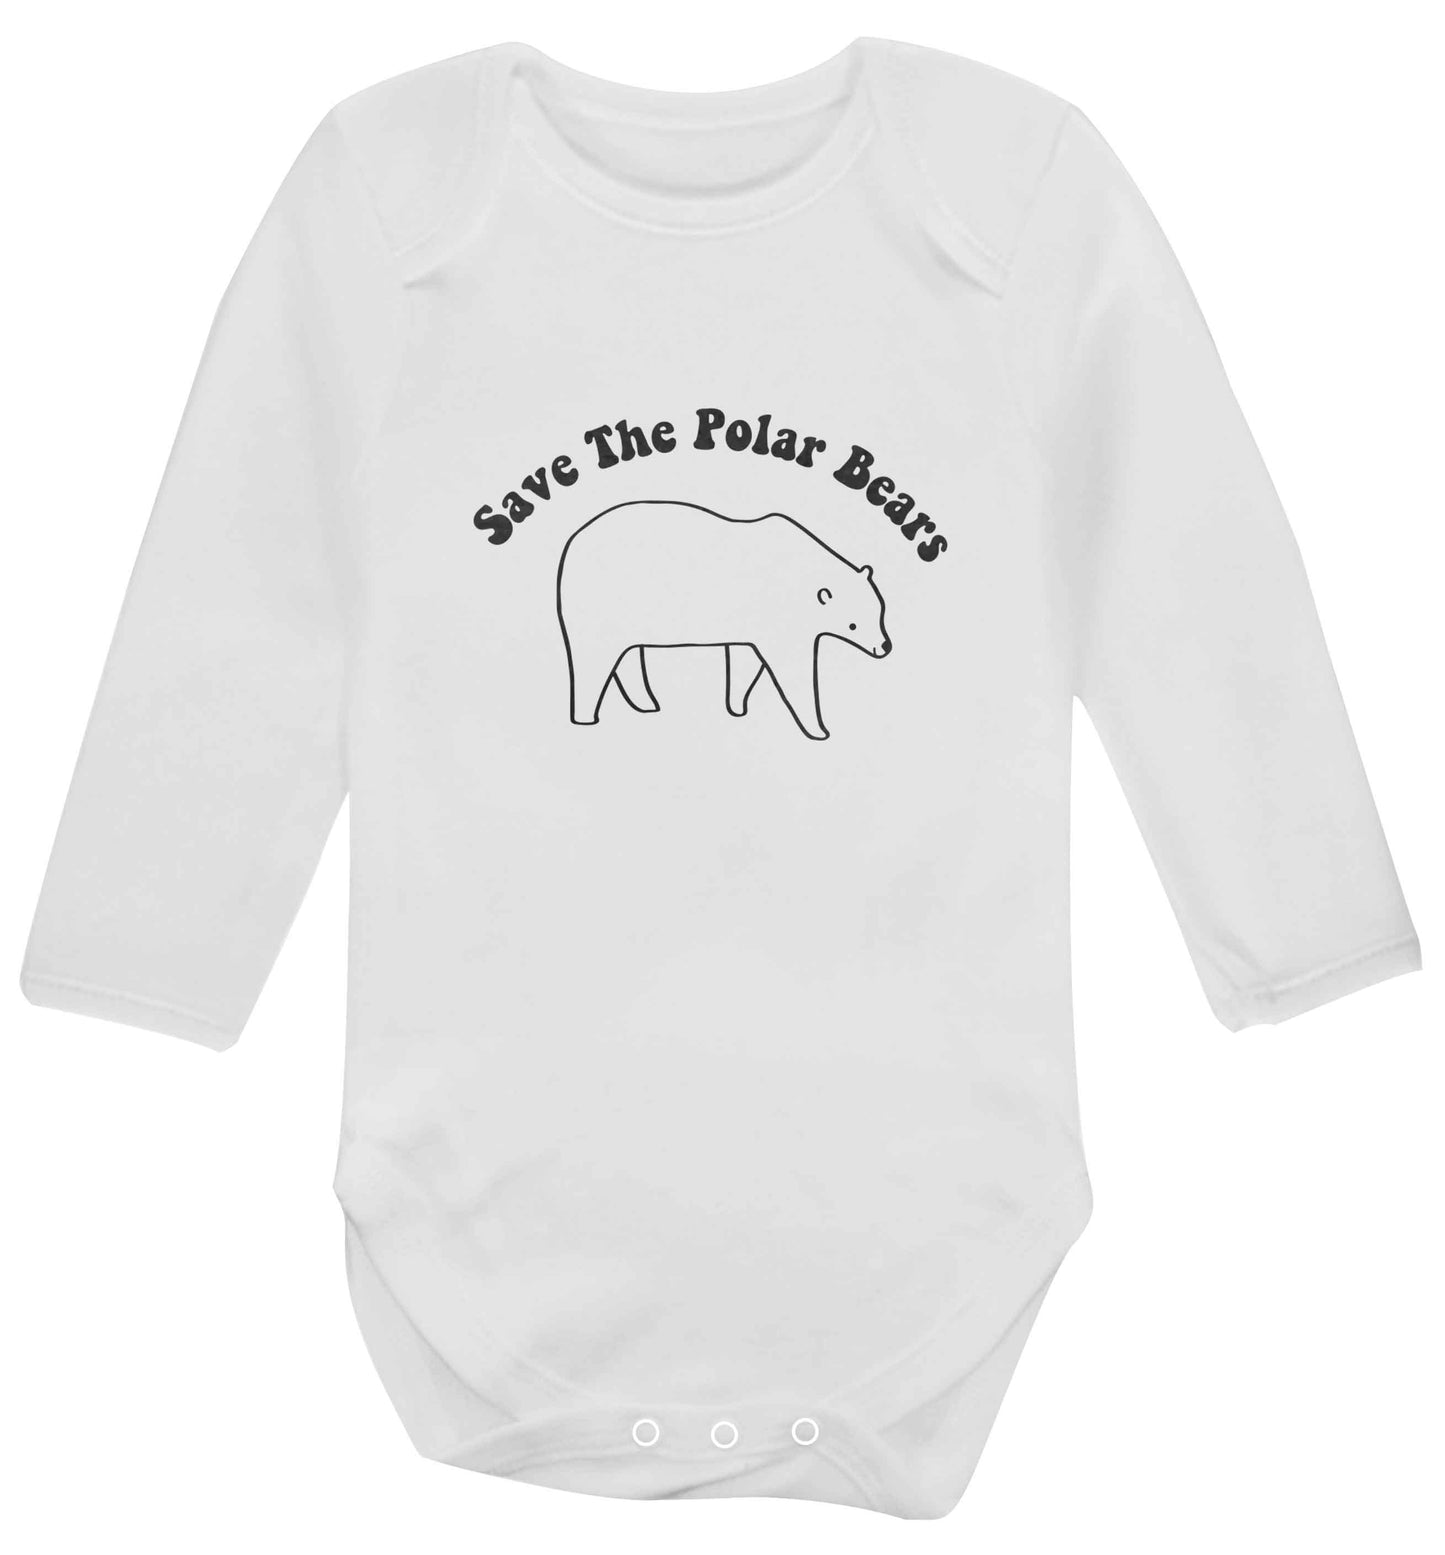 Save The Polar Bears baby vest long sleeved white 6-12 months